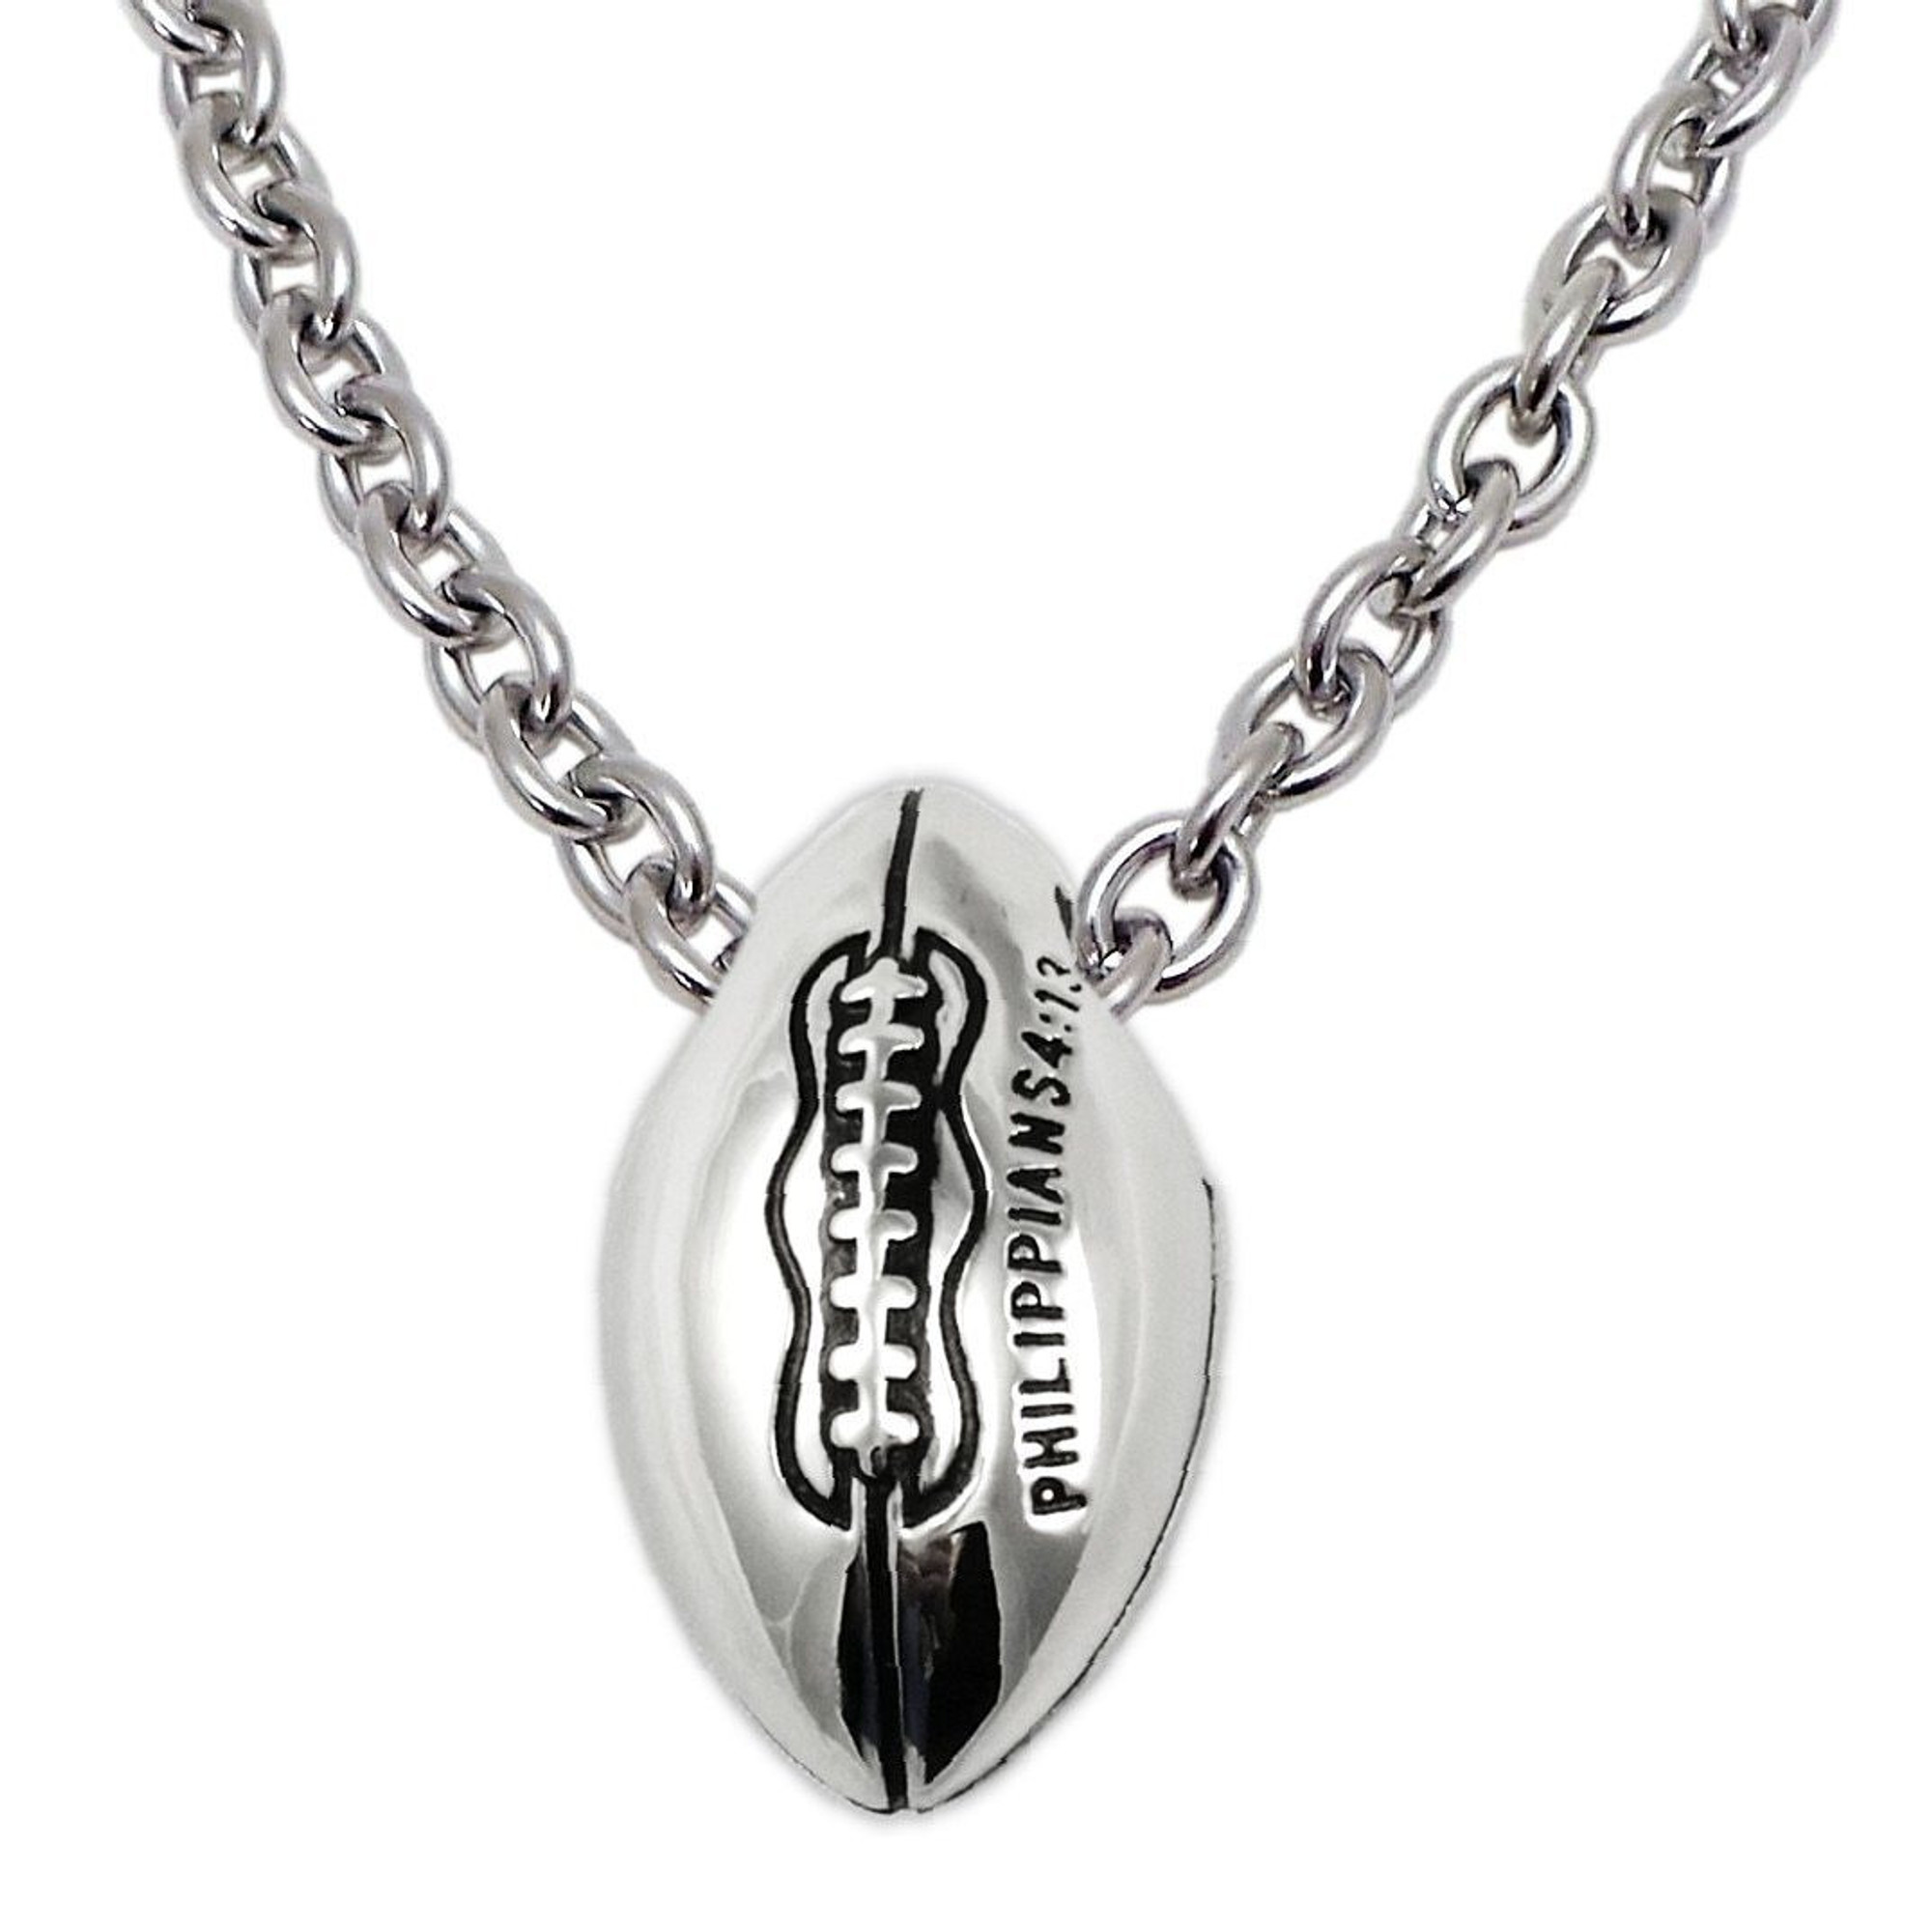 Sterling Silver Louisiana State Football Necklace - 24 inch, Women's